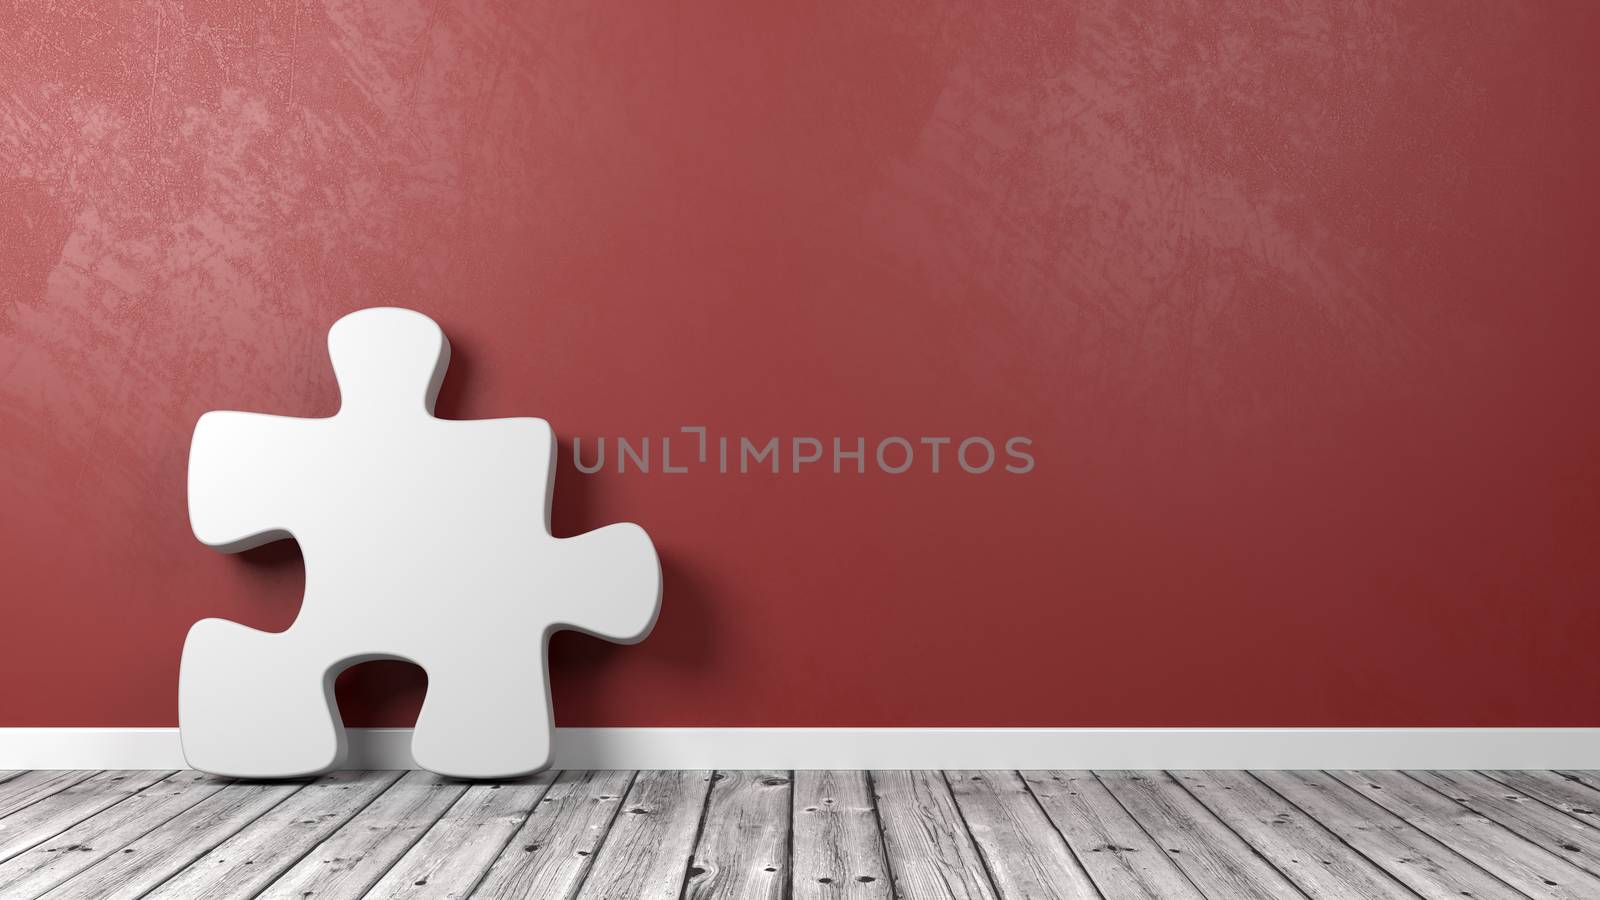 White Puzzle Piece Shape on Wooden Floor Against Red Wall with Copyspace 3D Illustration